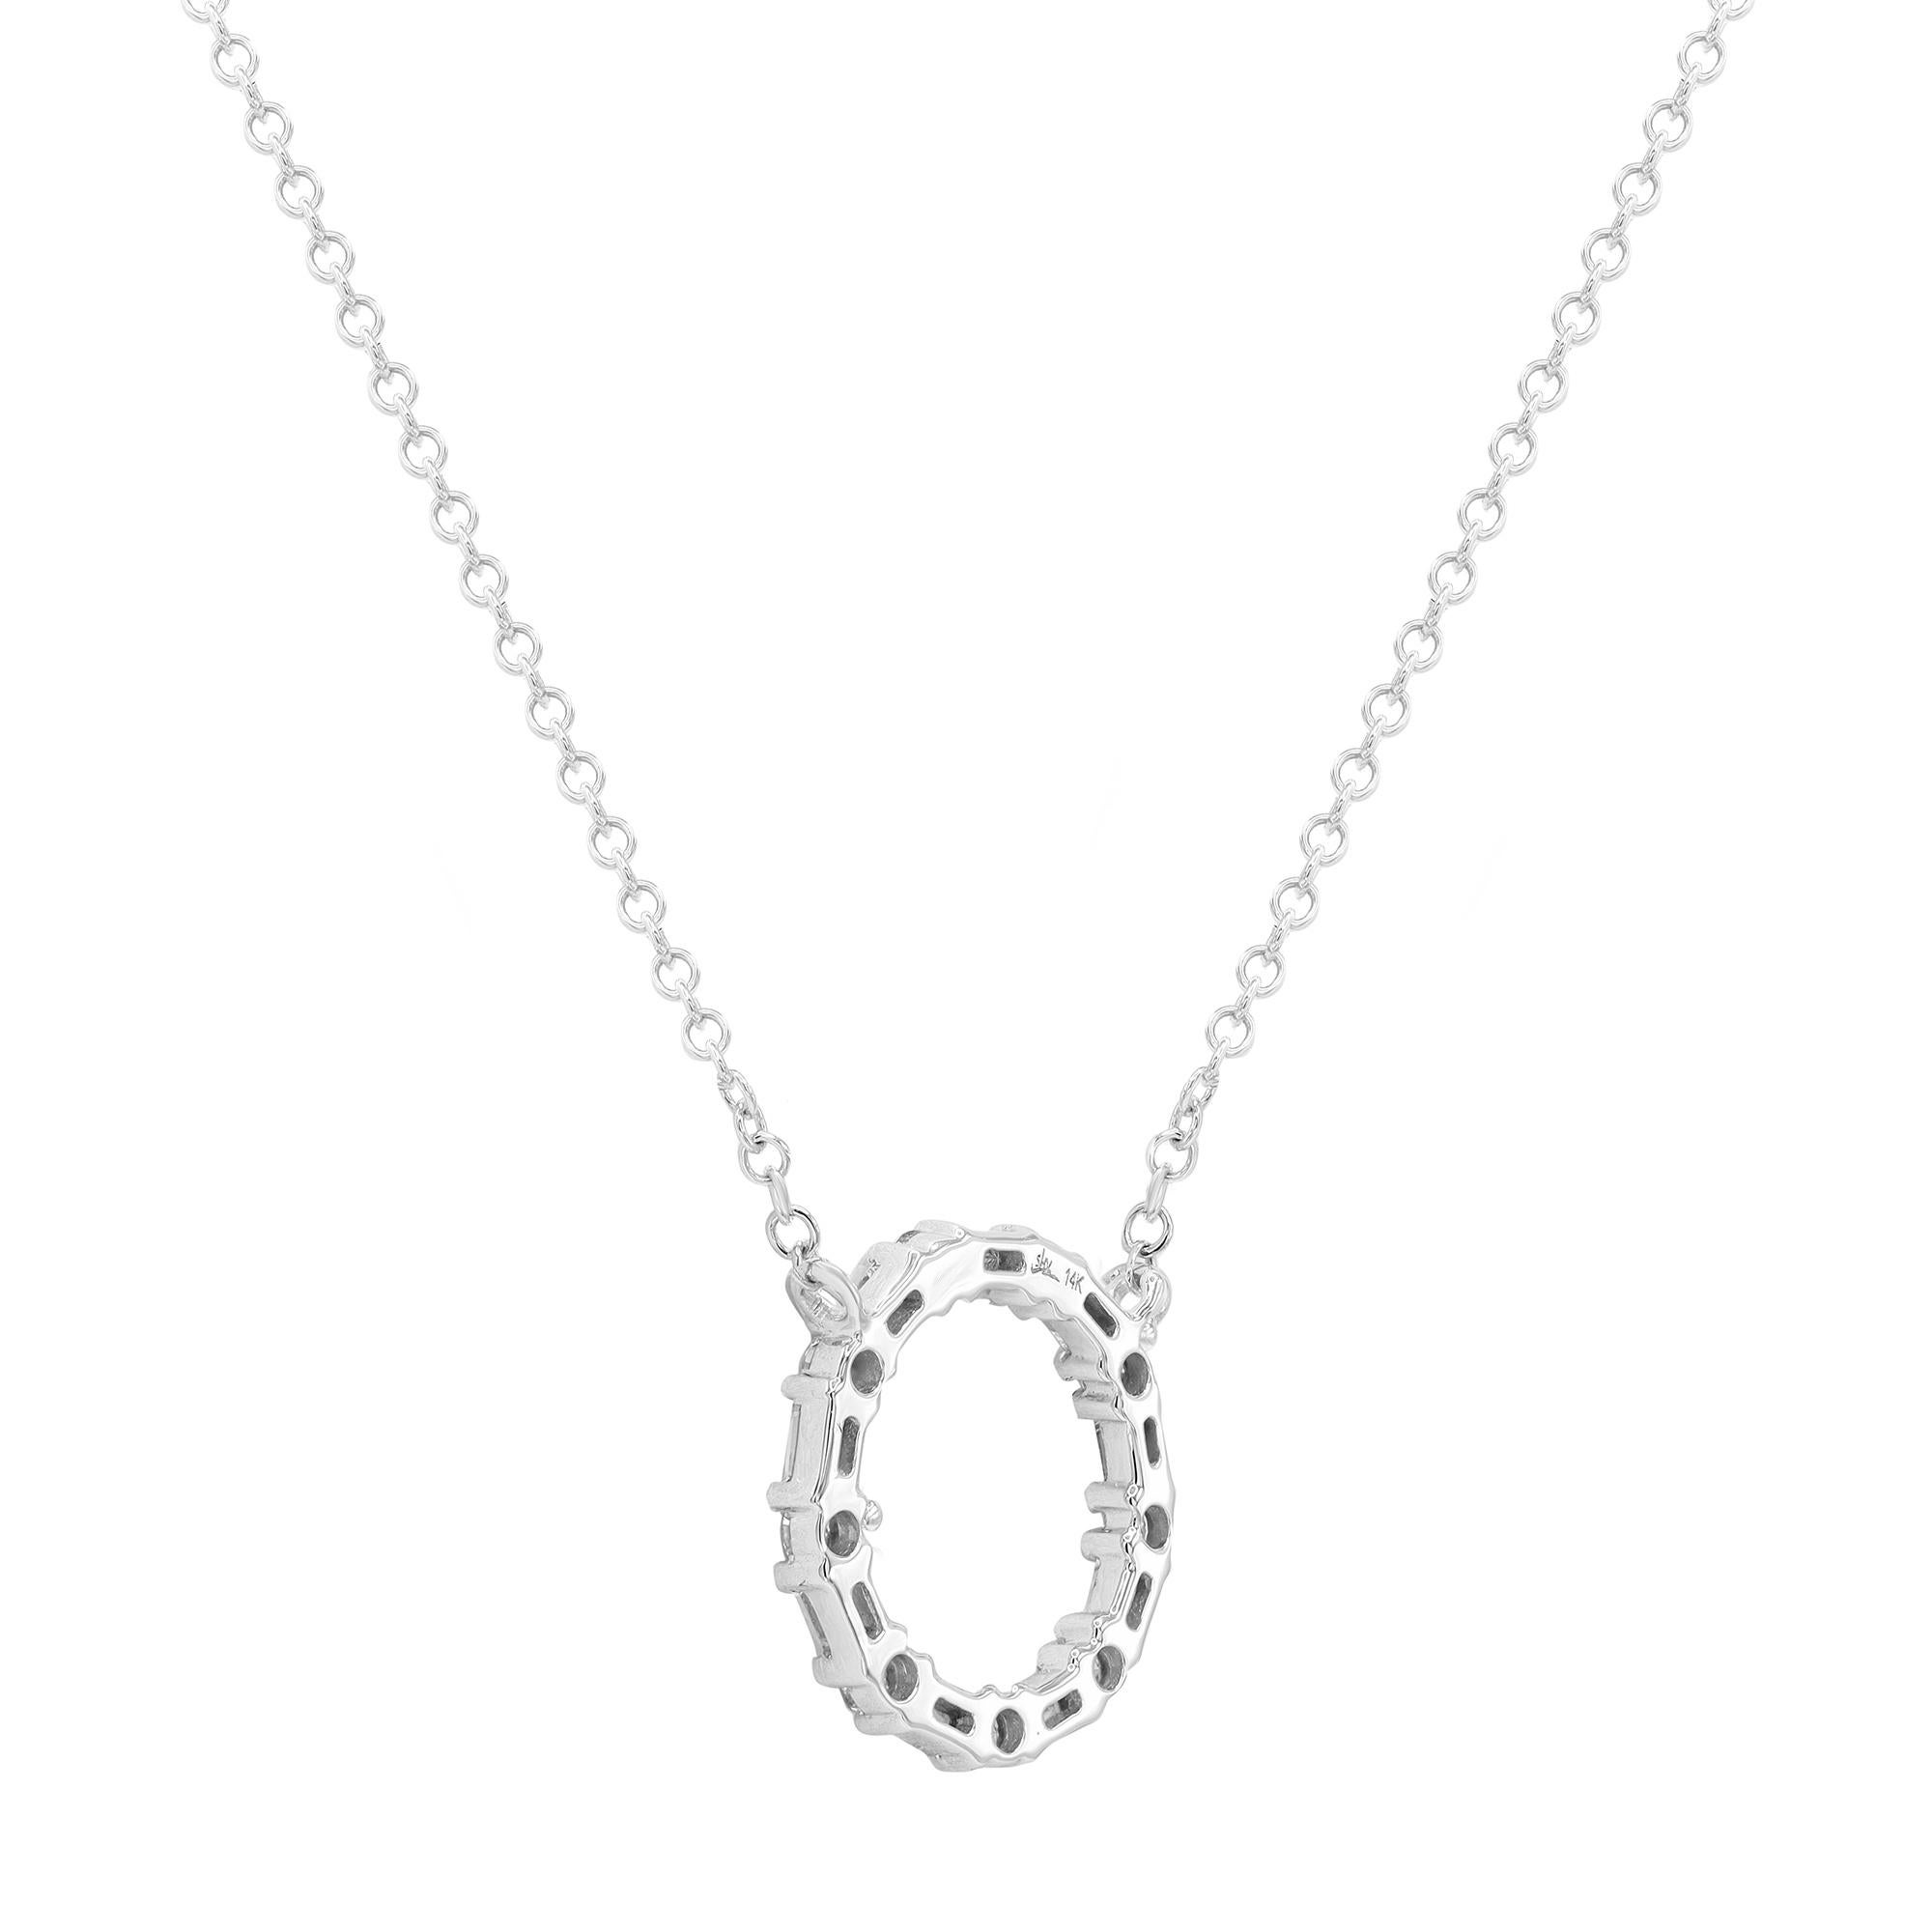 Fabulous and dramatic, this dazzling diamond circle pendant necklace is a perfect accent to everyday and evening looks. It features baguette cut and round cut diamonds weighing 0.29cts set in a circle shaped cut out pendant, crafted in 14k white